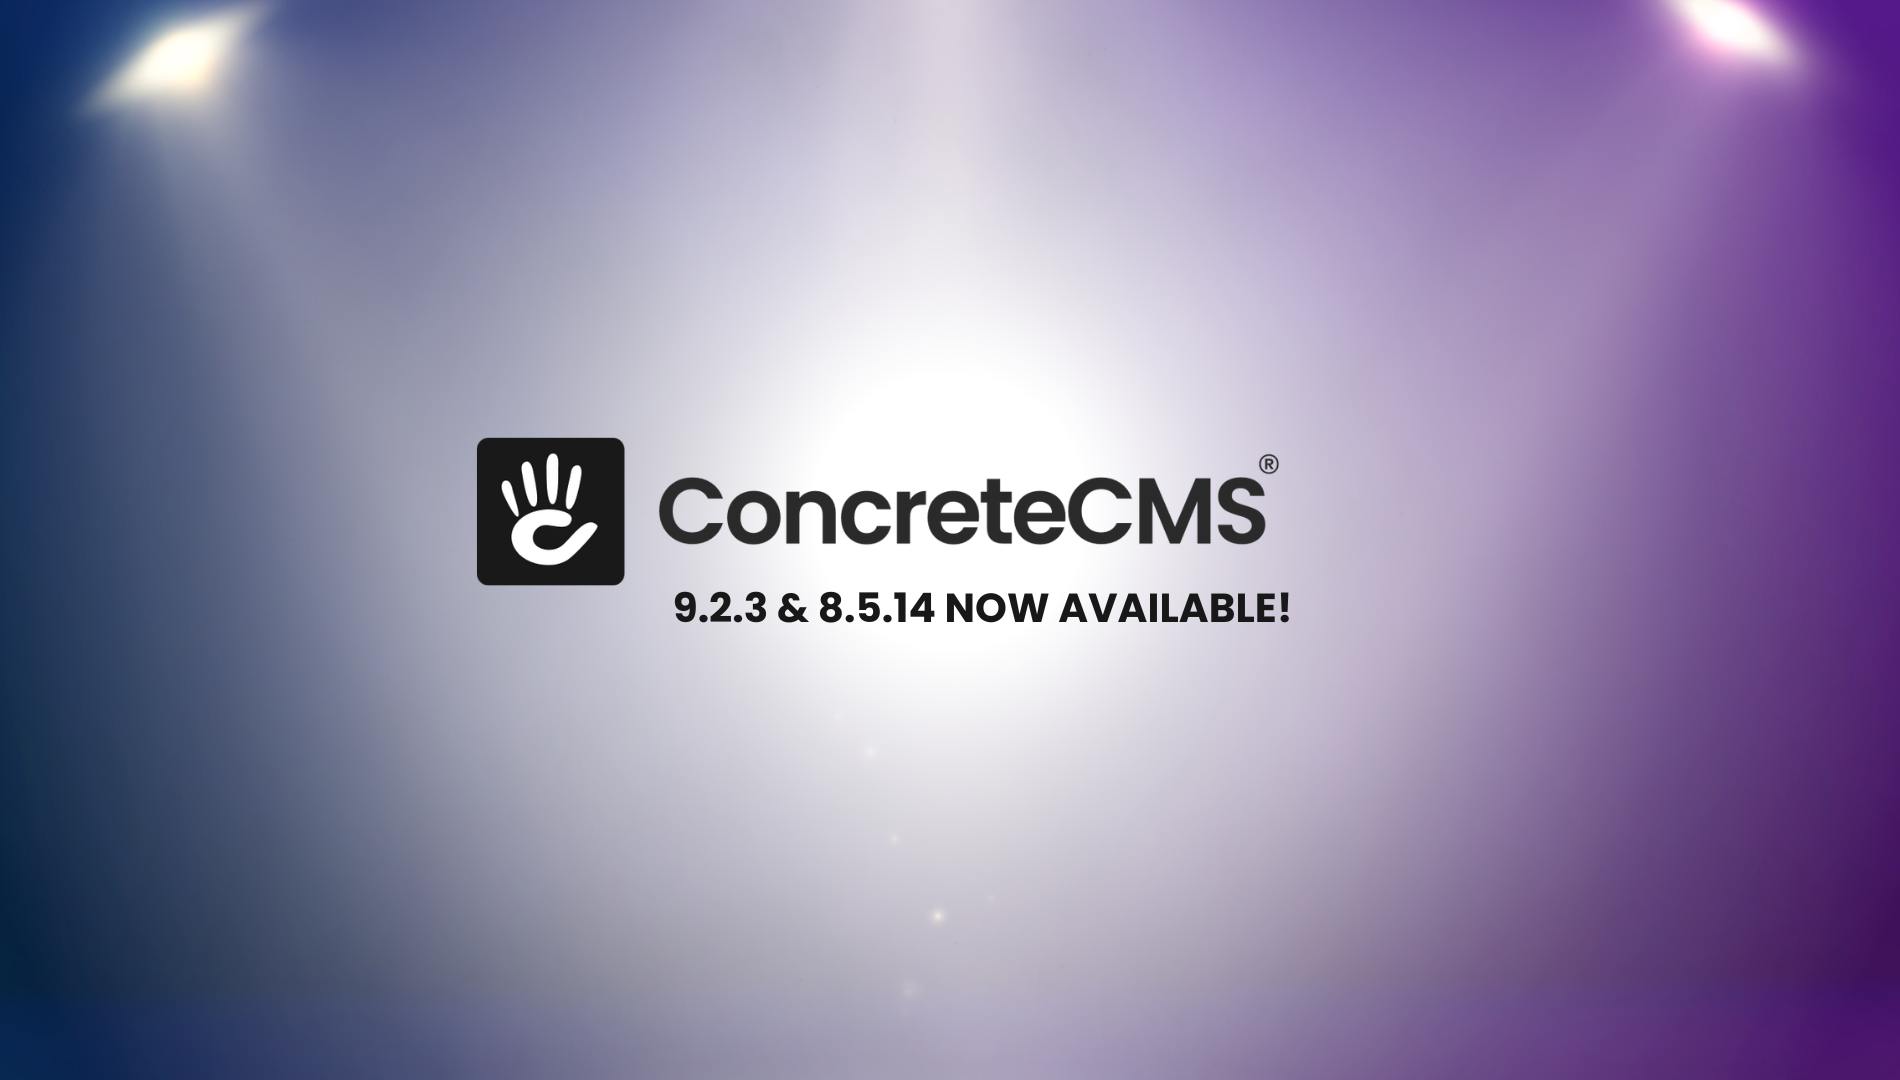 Concrete CMS 9.2.3 and 8.5.14 is Now Available!